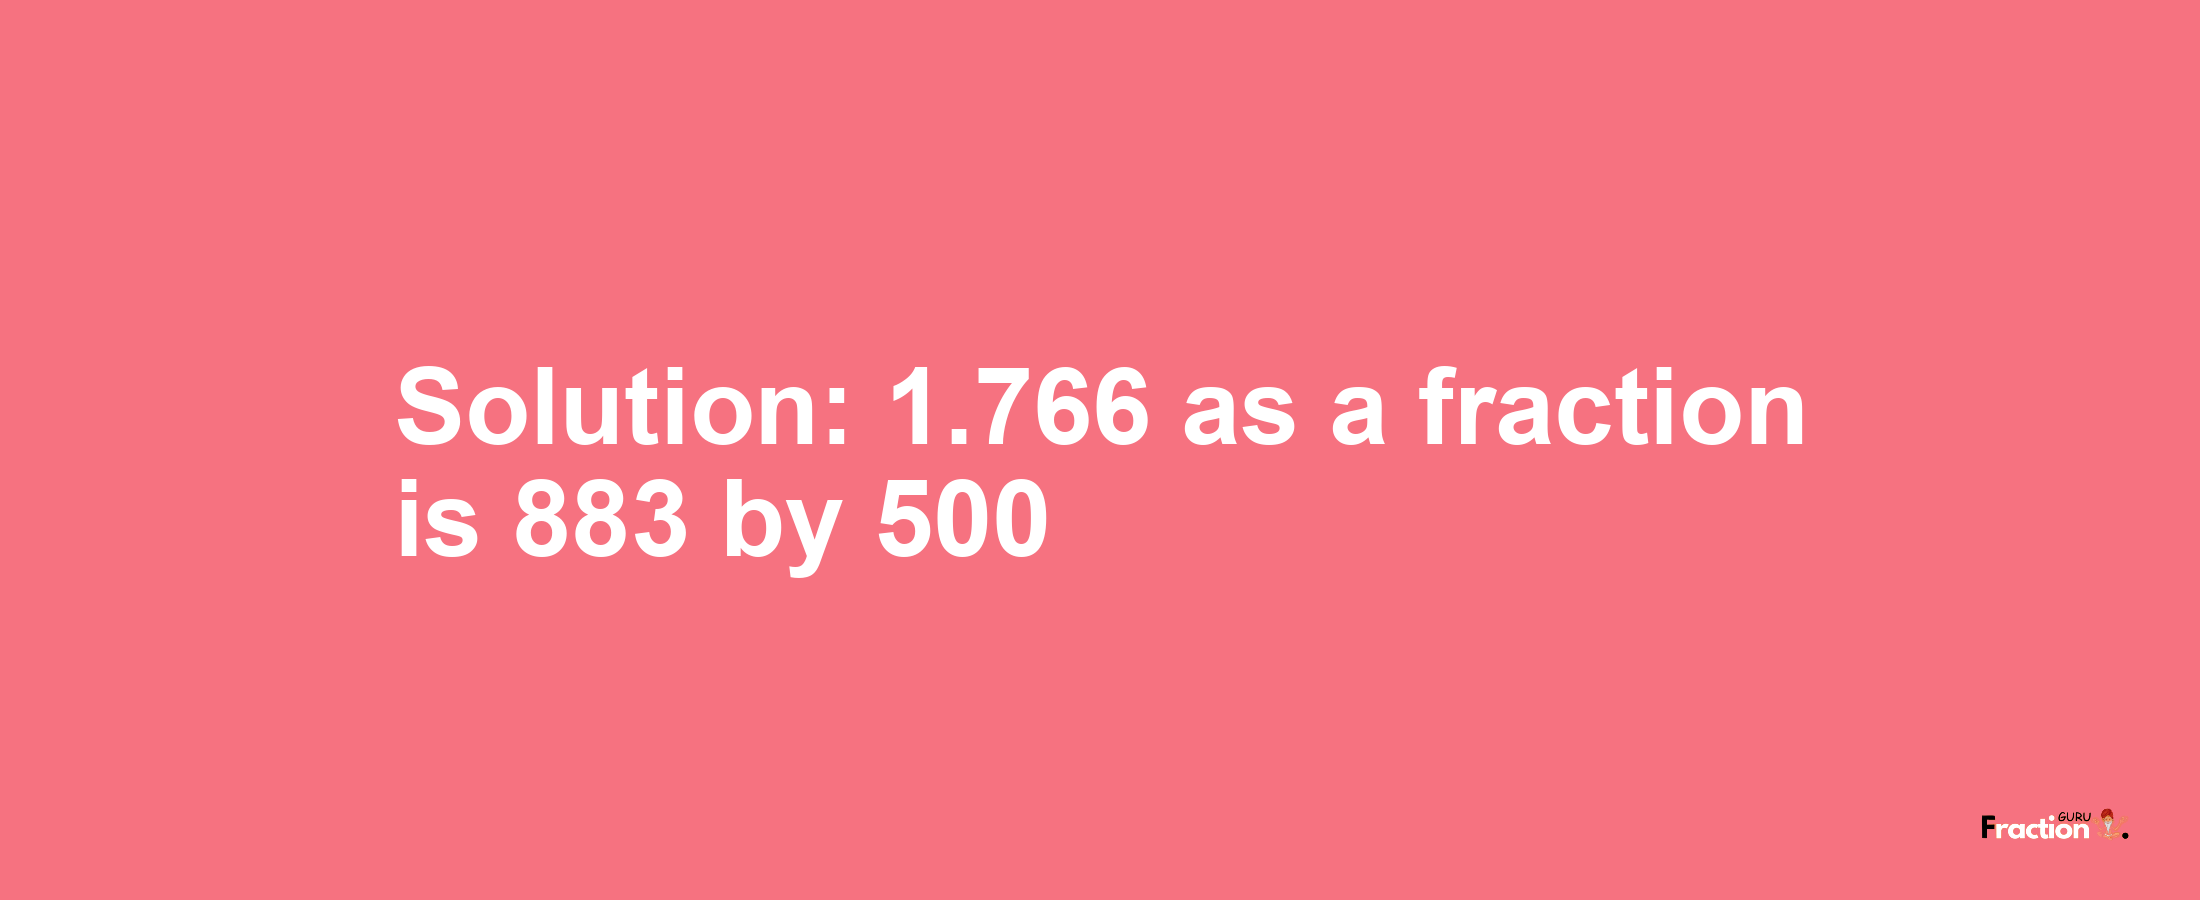 Solution:1.766 as a fraction is 883/500